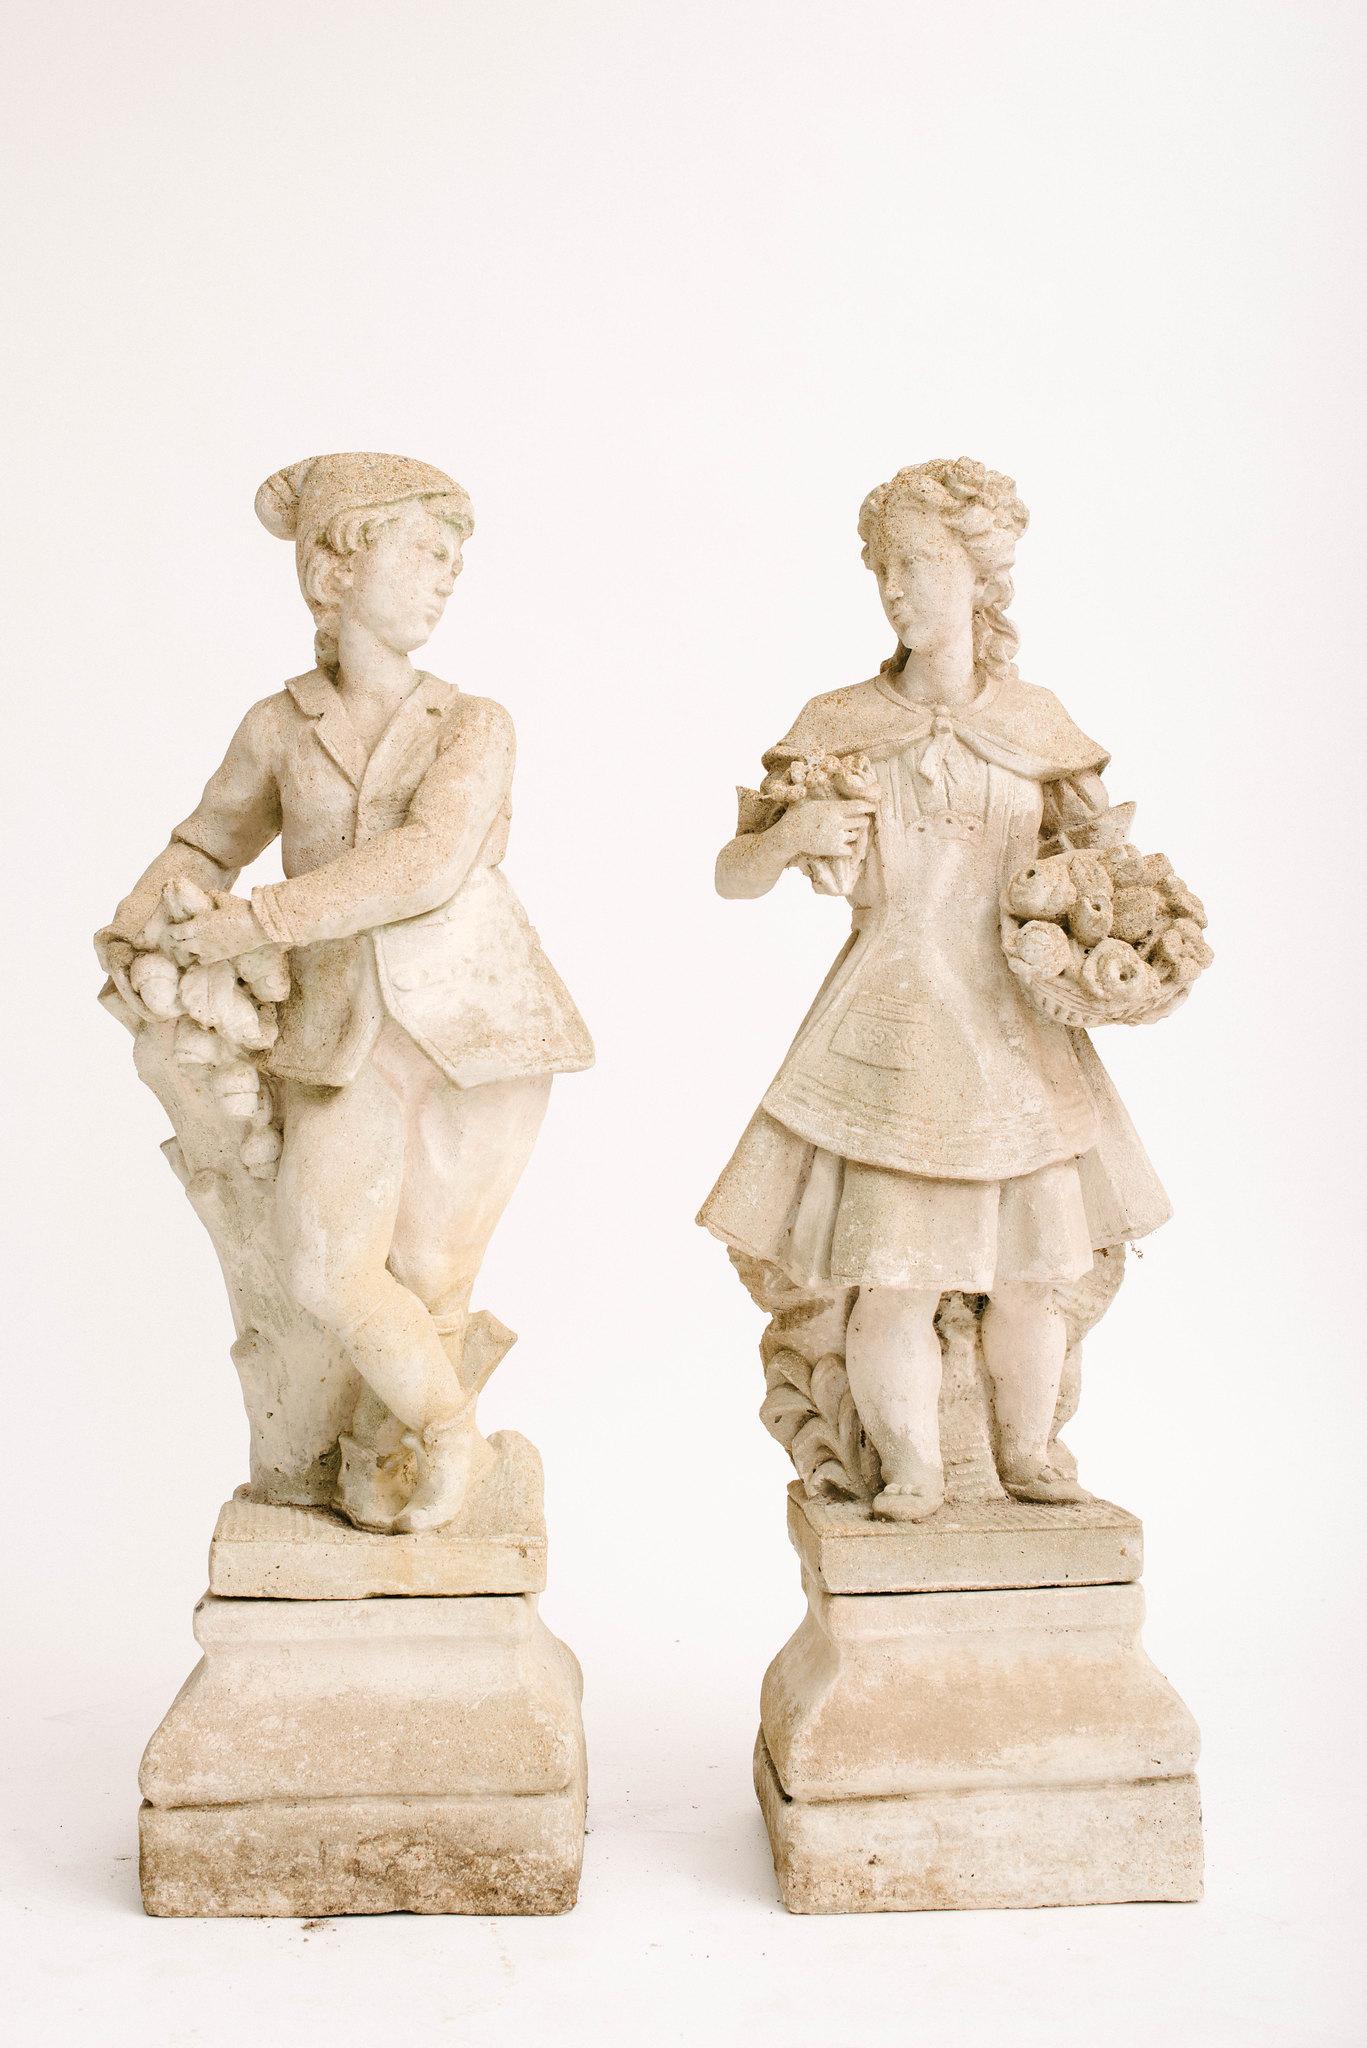 A lovely pair of 20th century concrete garden figures from France. He is perched next to an oak stump with foliage and acorns in hand. She carries two floral bouquets. These figures both sit atop two separate pedestal bases.